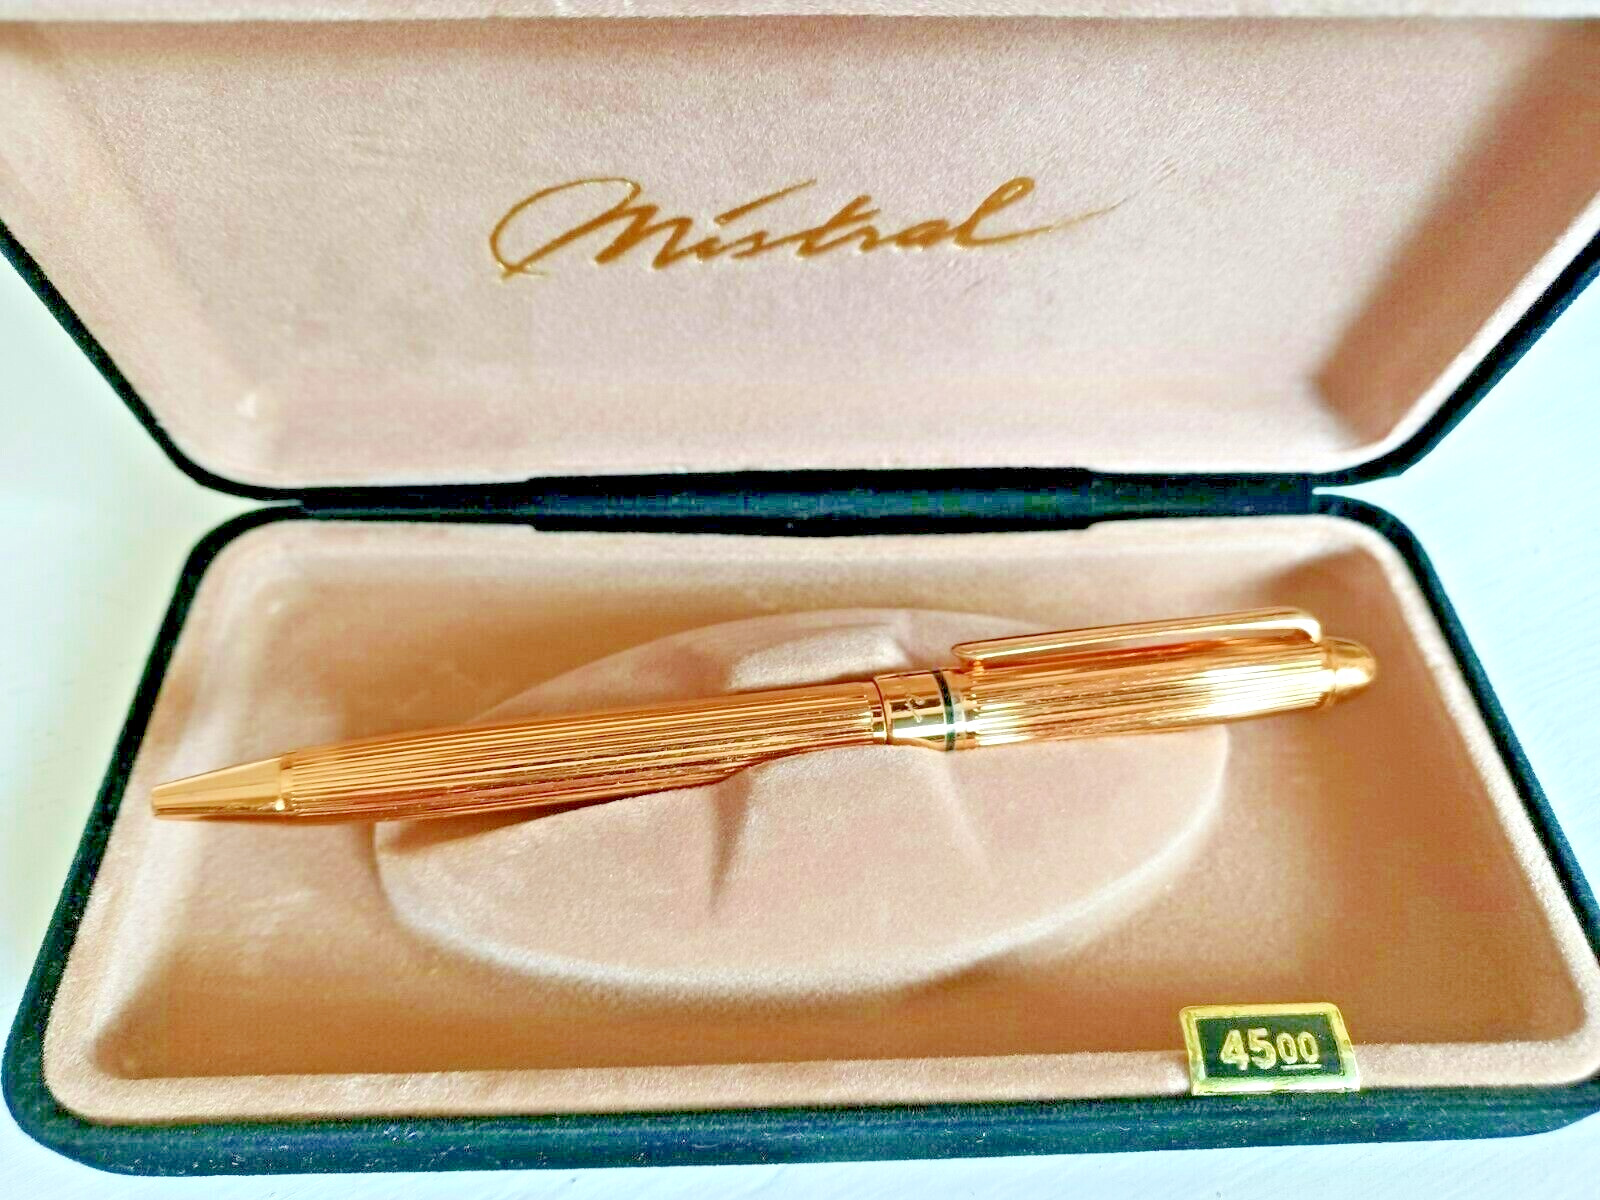 Luxury fancy gold tone writing pen by Mistral in case for writers authors new